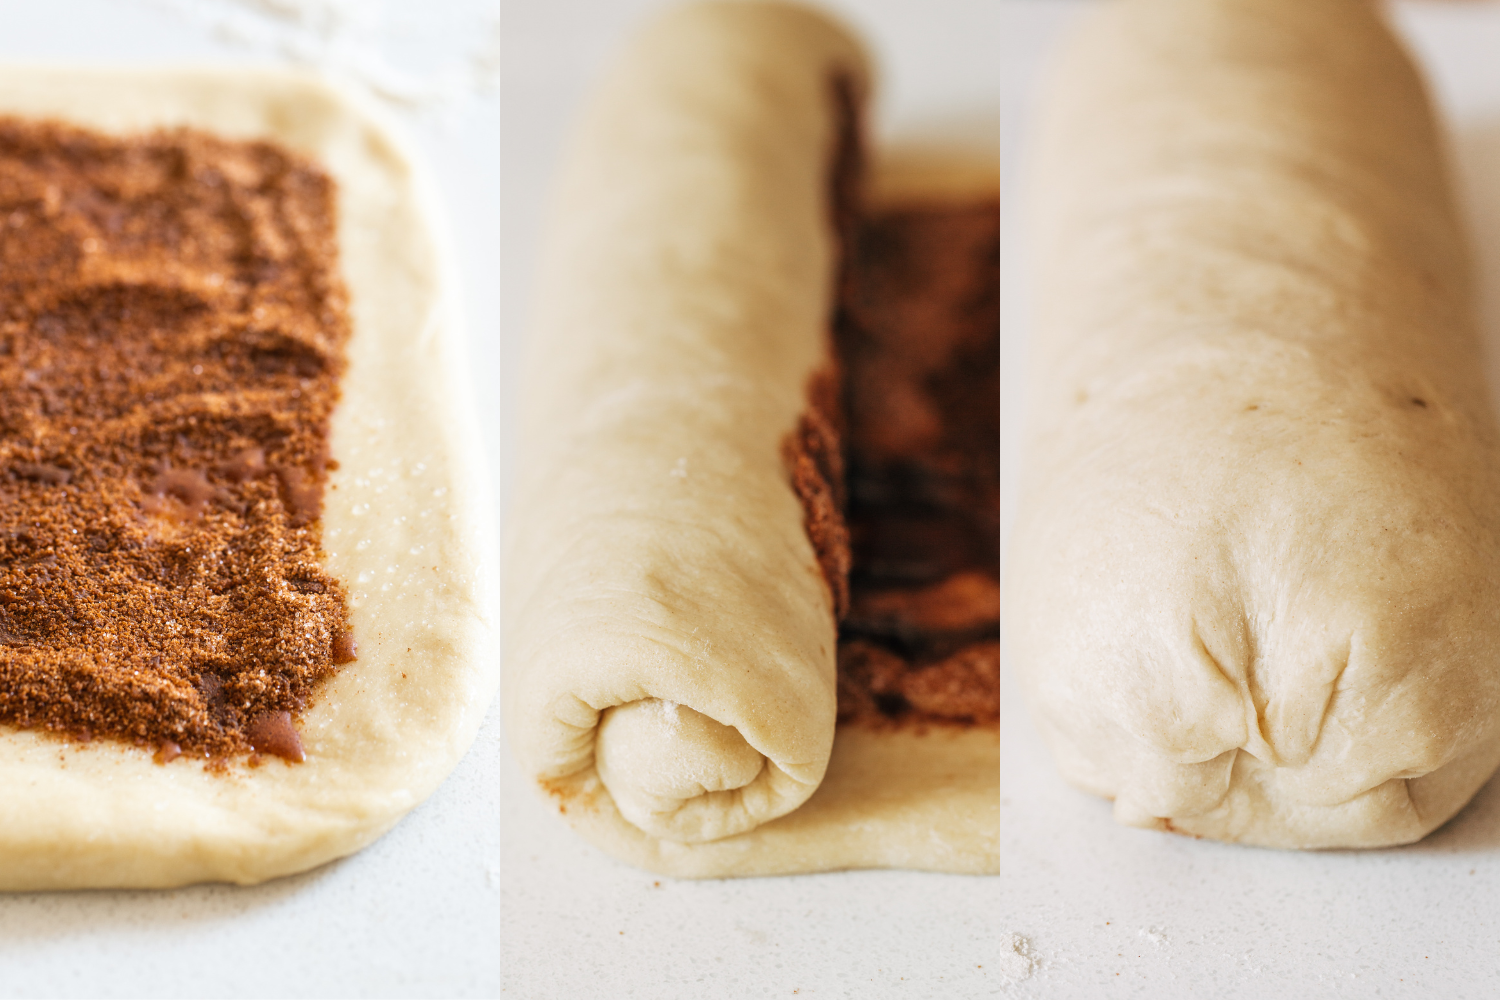 three side-by-side images demonstrating how to roll up this cinnamon swirl bread before its second proof and baking.